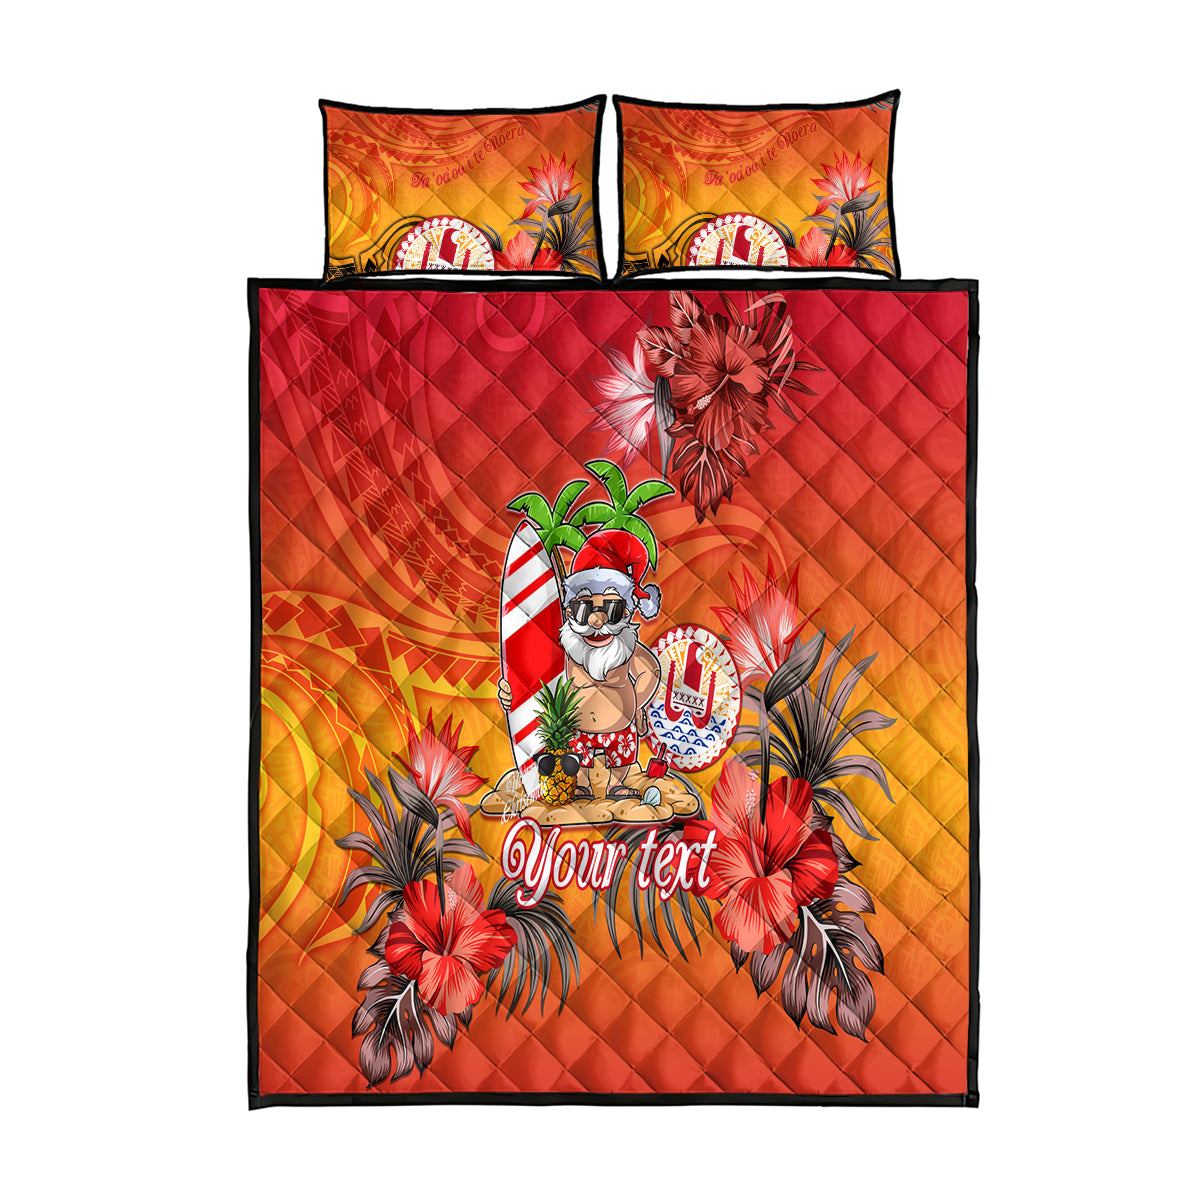 Personalised Wishes in Tahitian Christmas Quilt Bed Set French Polynesia Santa Beach LT9 Red - Polynesian Pride